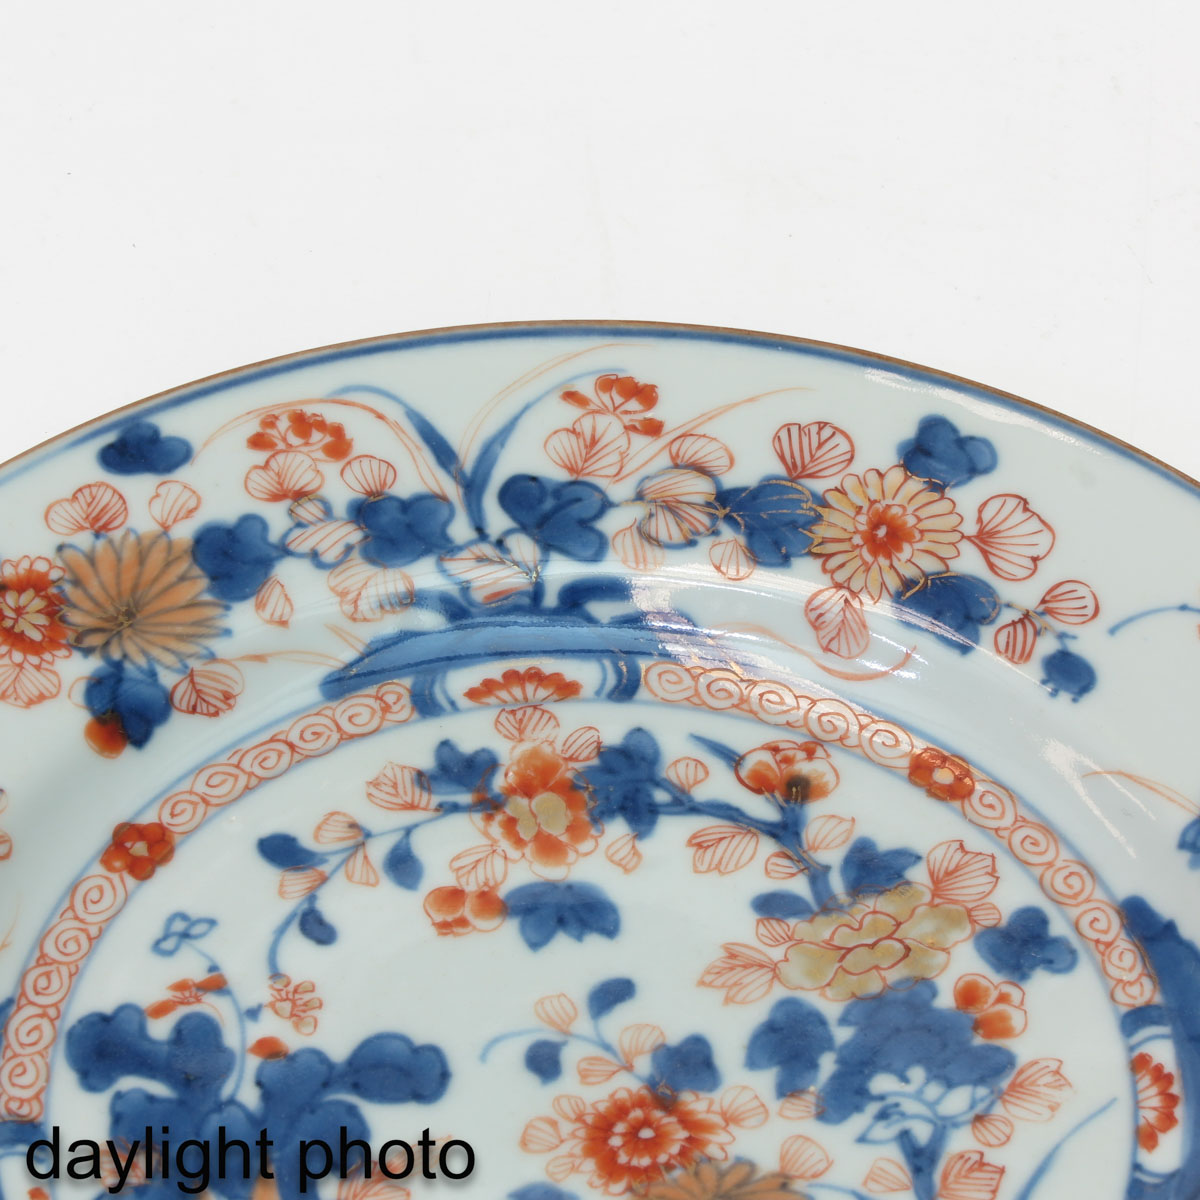 A Collection of 4 Imari Plates - Image 9 of 10